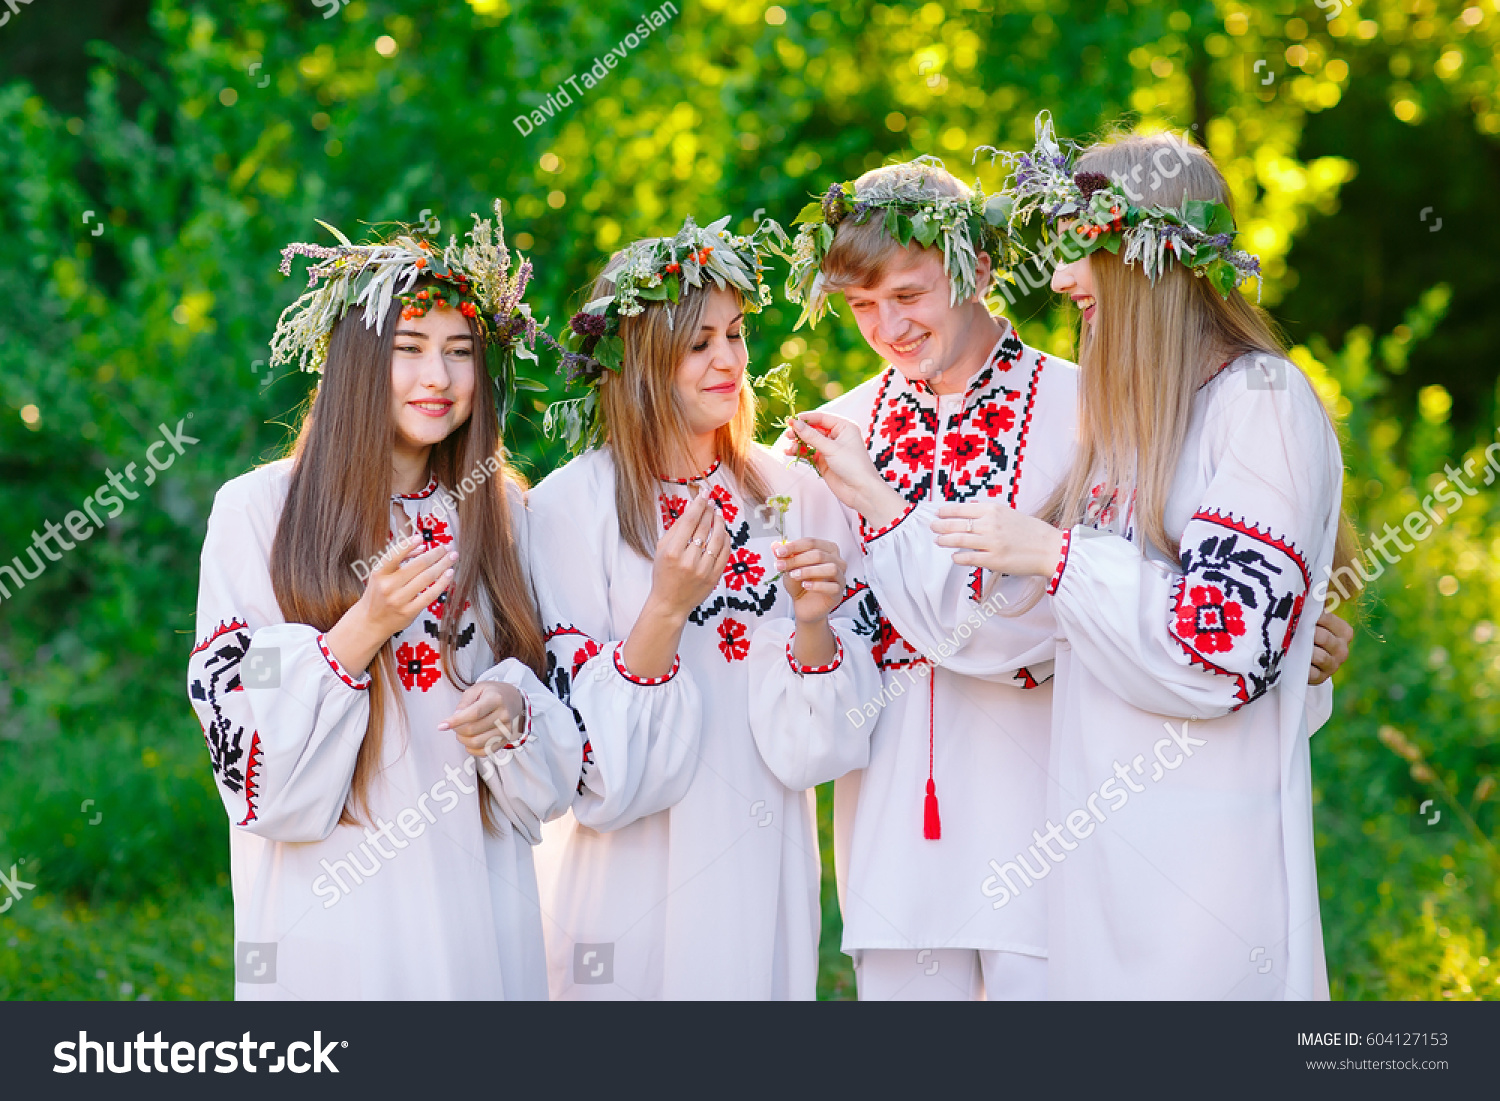 Midsummer. A group of young people of Slavic appearance at the celebration of Midsummer. #604127153